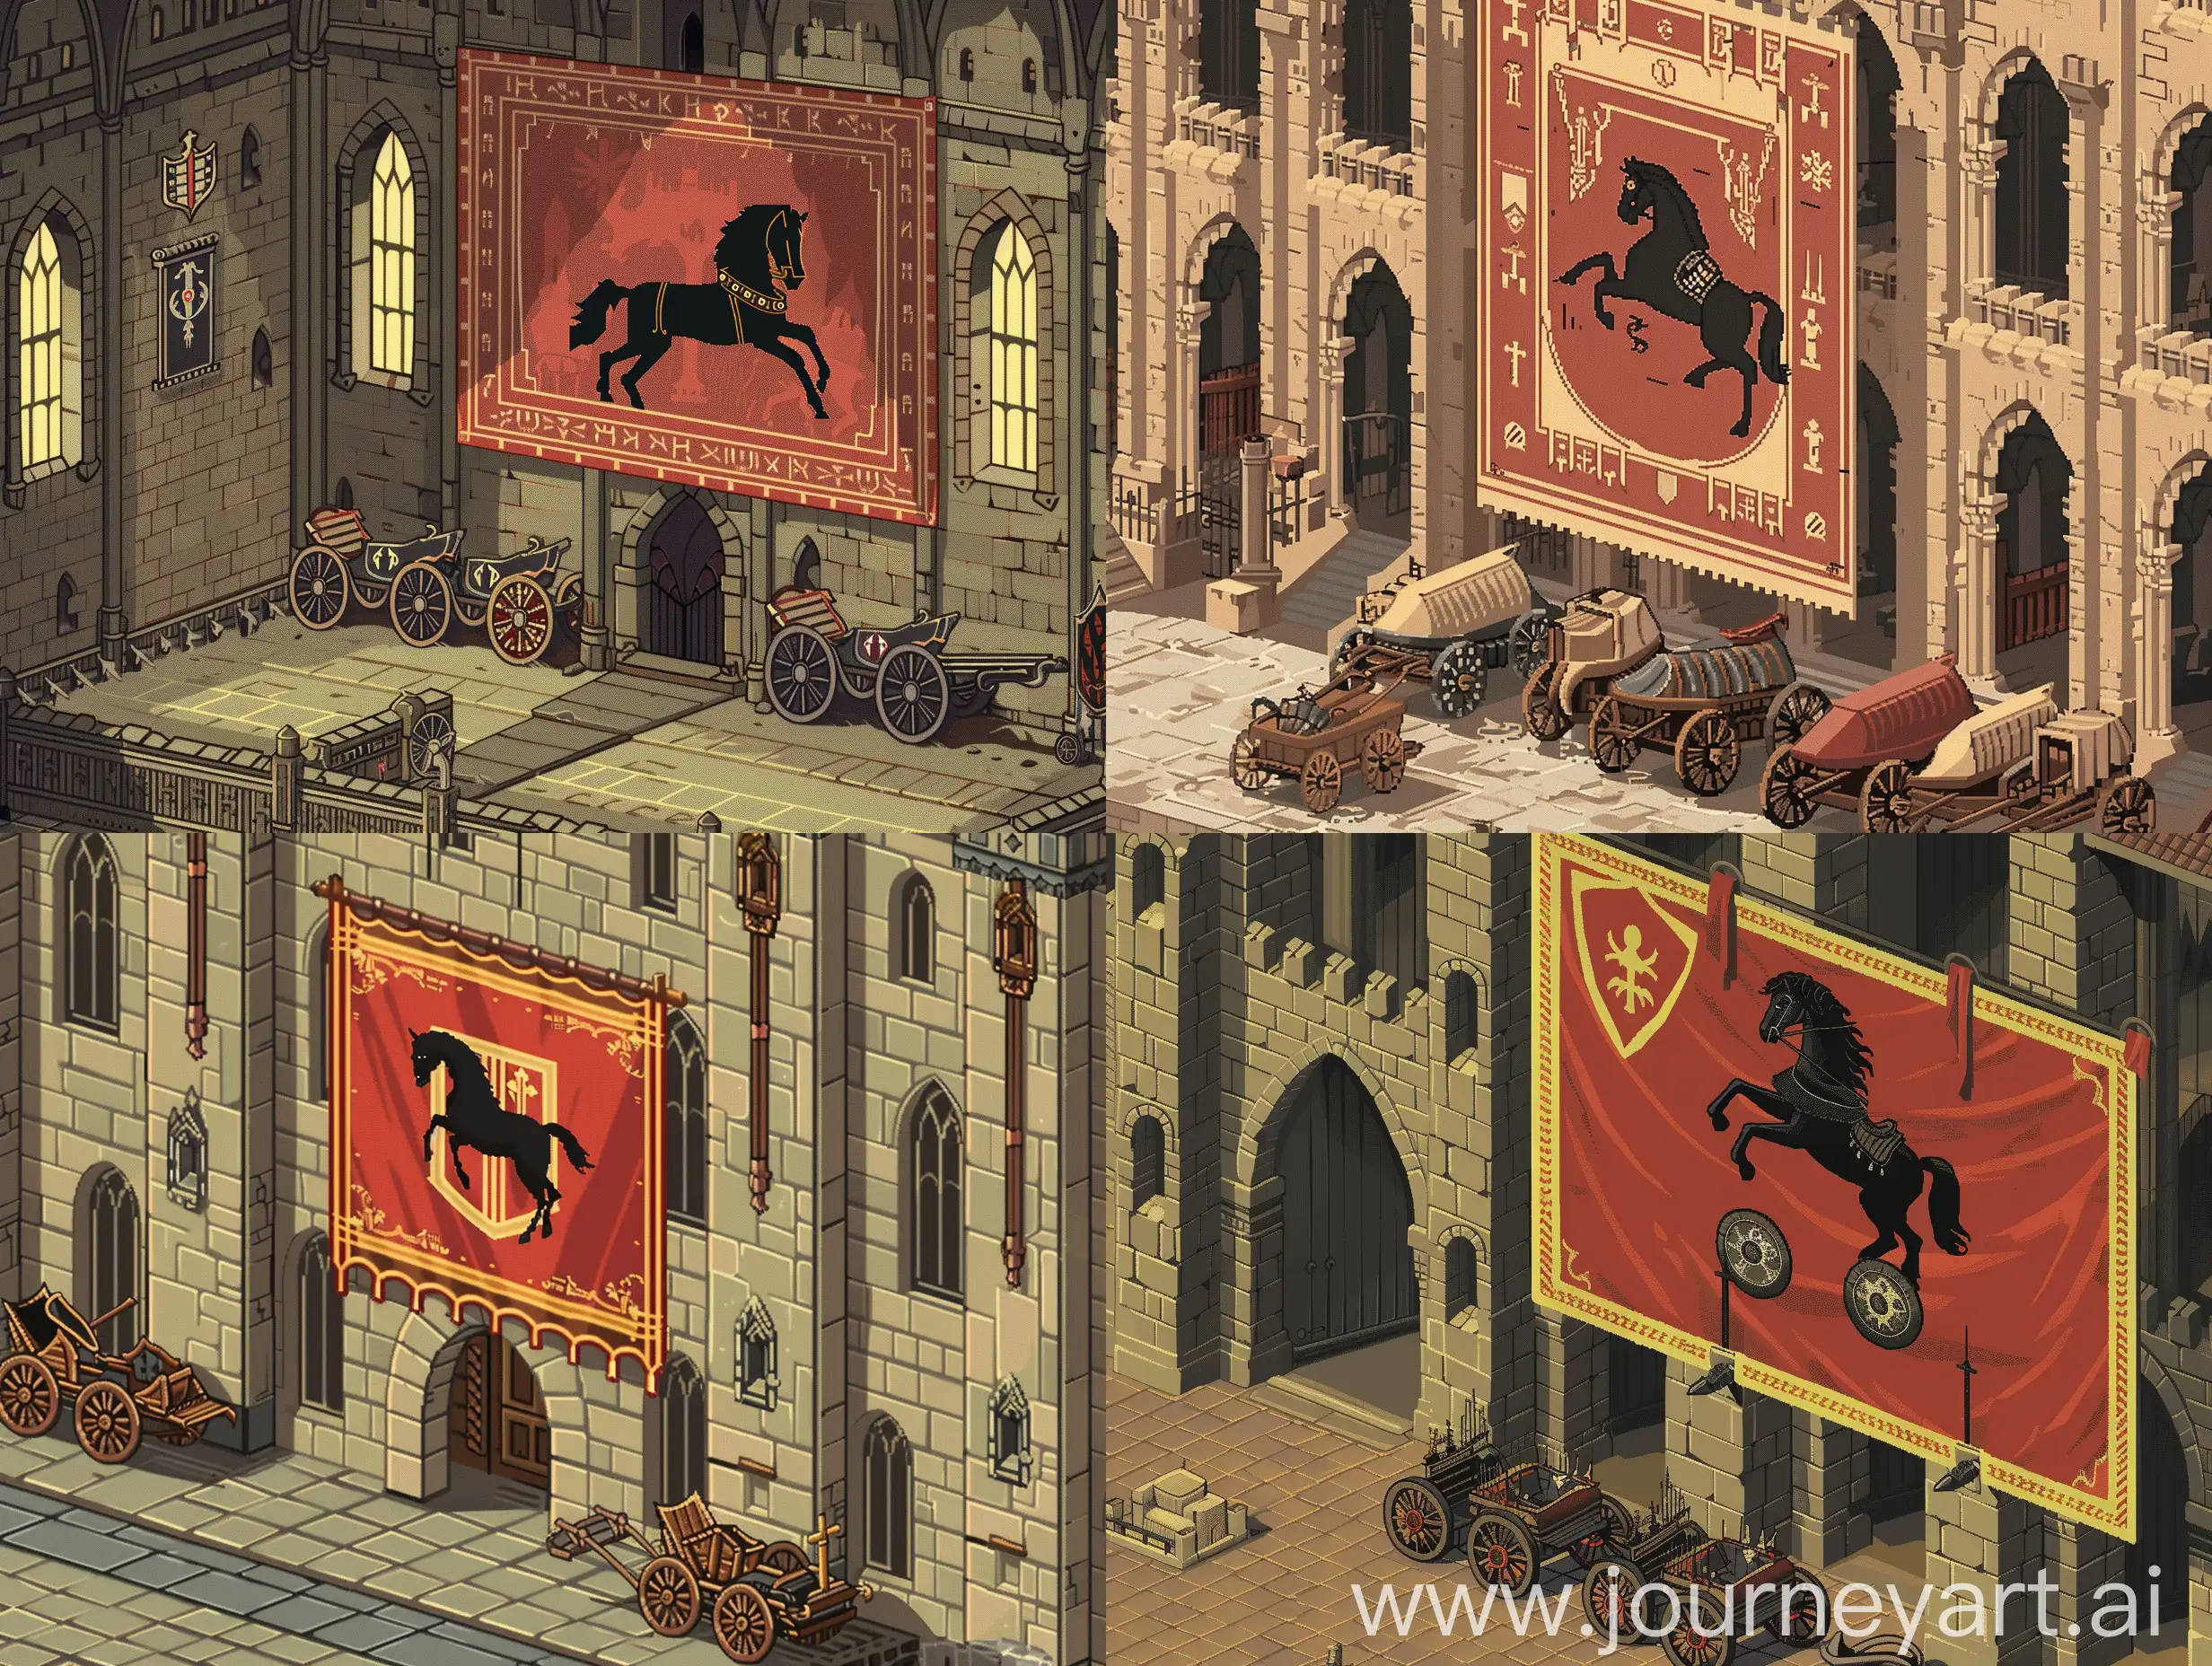 Isometric perspective of a medieval gothic abbey, in 8-bit style, with ancient chariots on display. A big heraldry banner on the biggest wall has a black prancing horse on a red background.